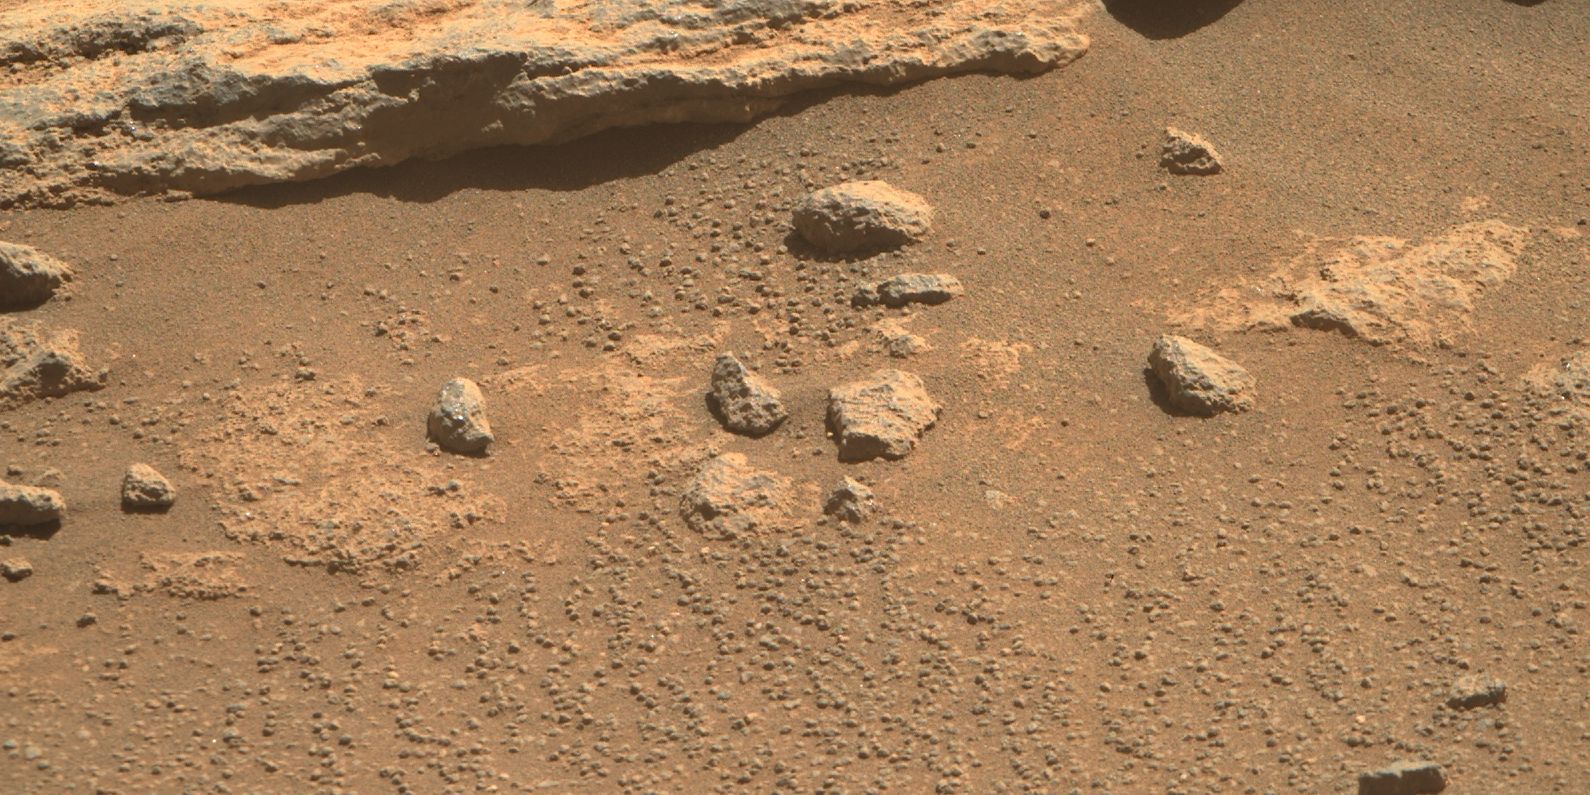 Perseverance Finds Mars Rocks With Totally Different Shapes & Sizes